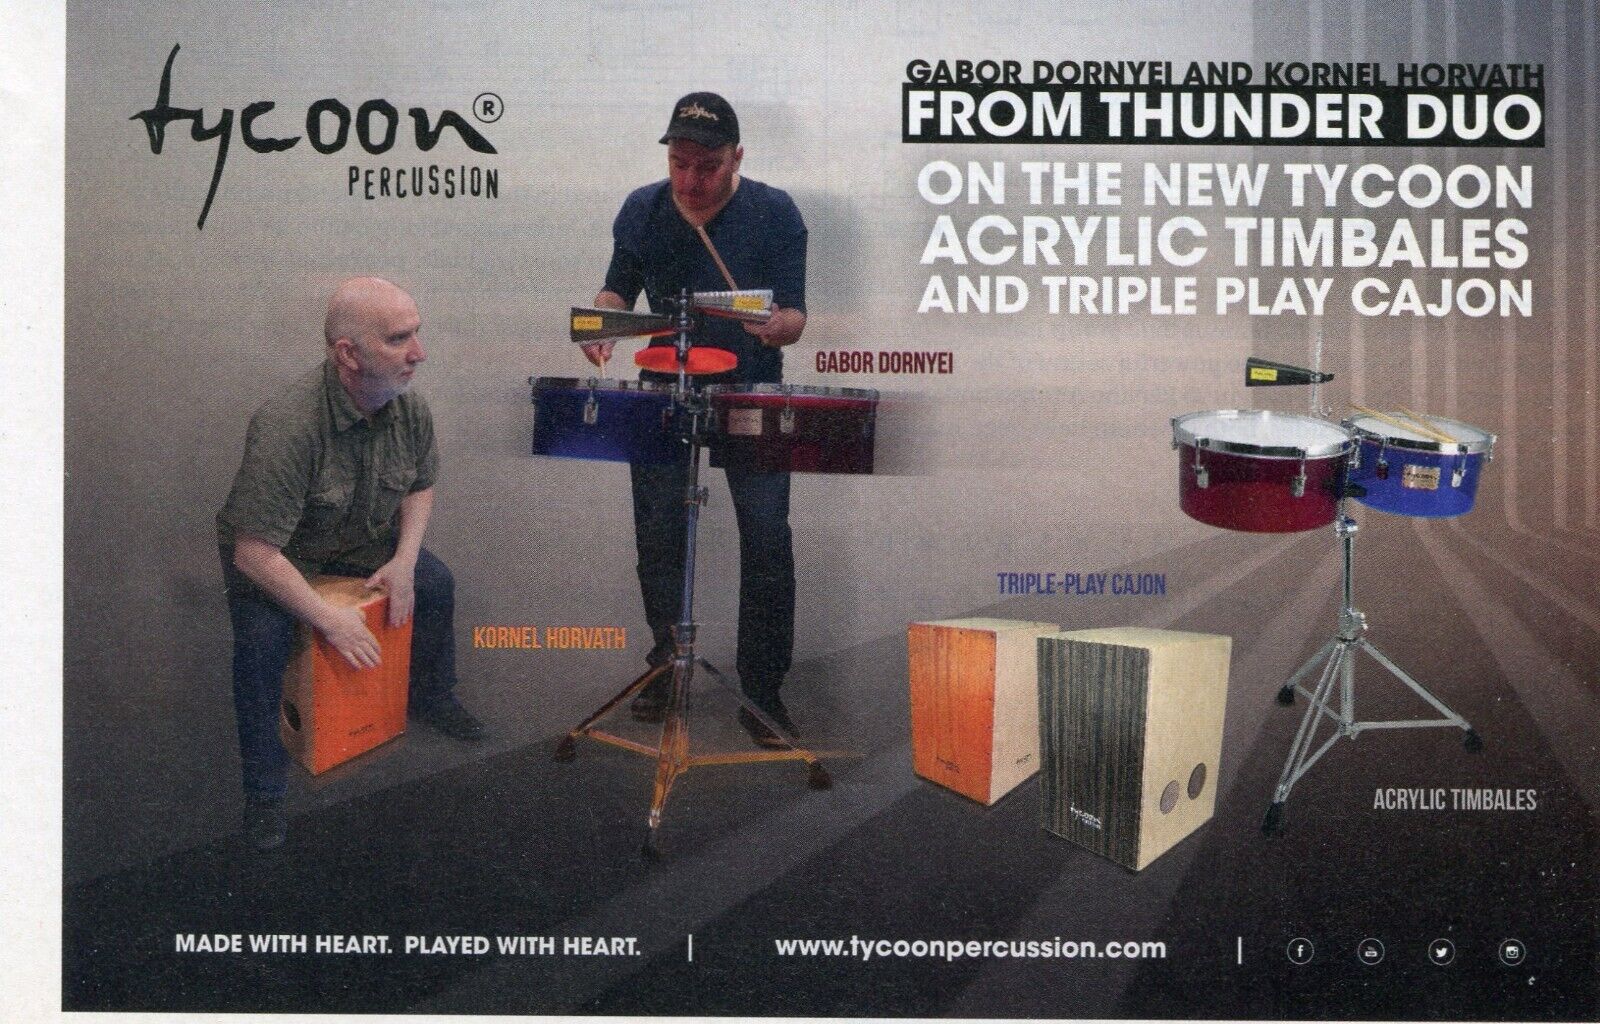 2015 small Print Ad of Tycoon Percussion w Kornel Horvath & Gabor Dornyei